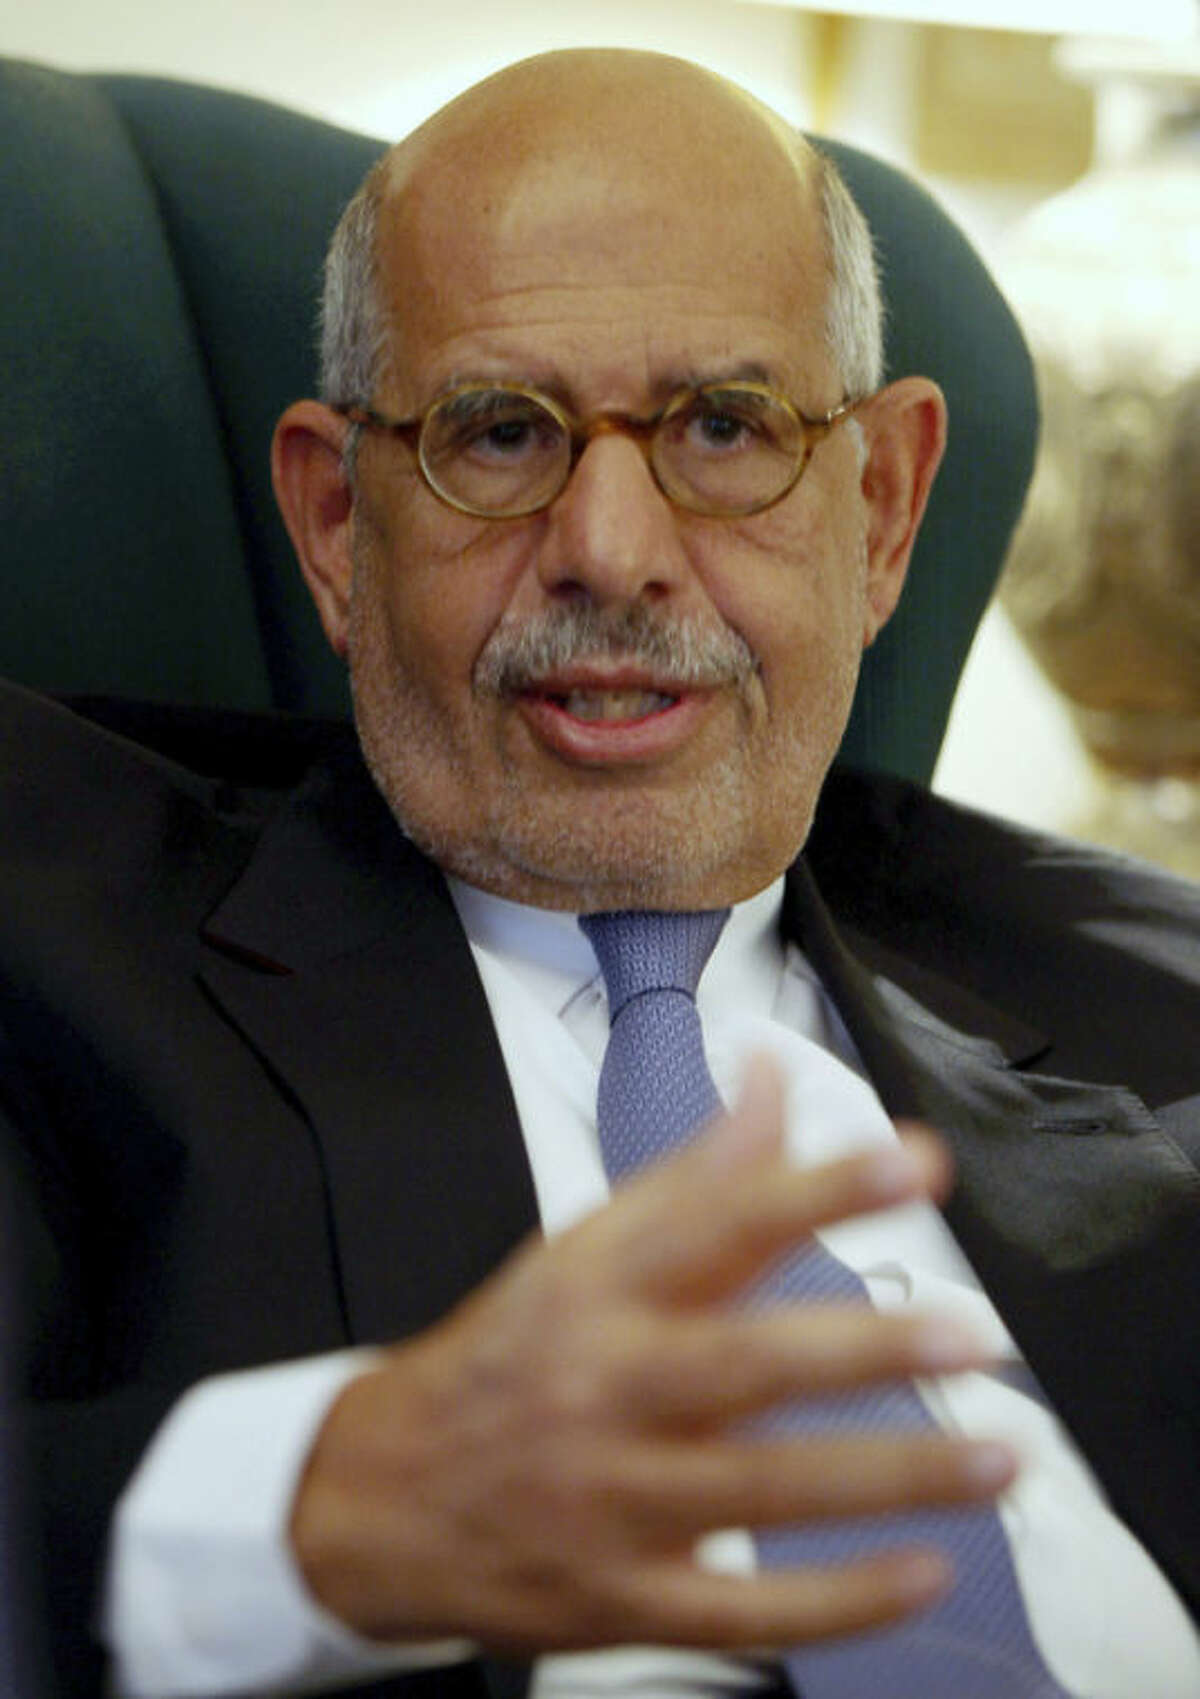 FILE - In this Tuesday, April 30, 2013, file photo, Egypt's leading opposition leader Mohamed ElBaradei speaks to a small group of journalists including The Associated Press at his house on the outskirts of Cairo, Egypt. An opposition spokesman says pro-reform leader Mohamed ElBaradei has been named interim prime minister. Khaled Dawoud of the National Salvation Front, the main opposition grouping, told The Associated Press that interim President Adly Mansour will swear in ElBaradei on Saturday evening.(AP Photo/Khalil Hamra, File)